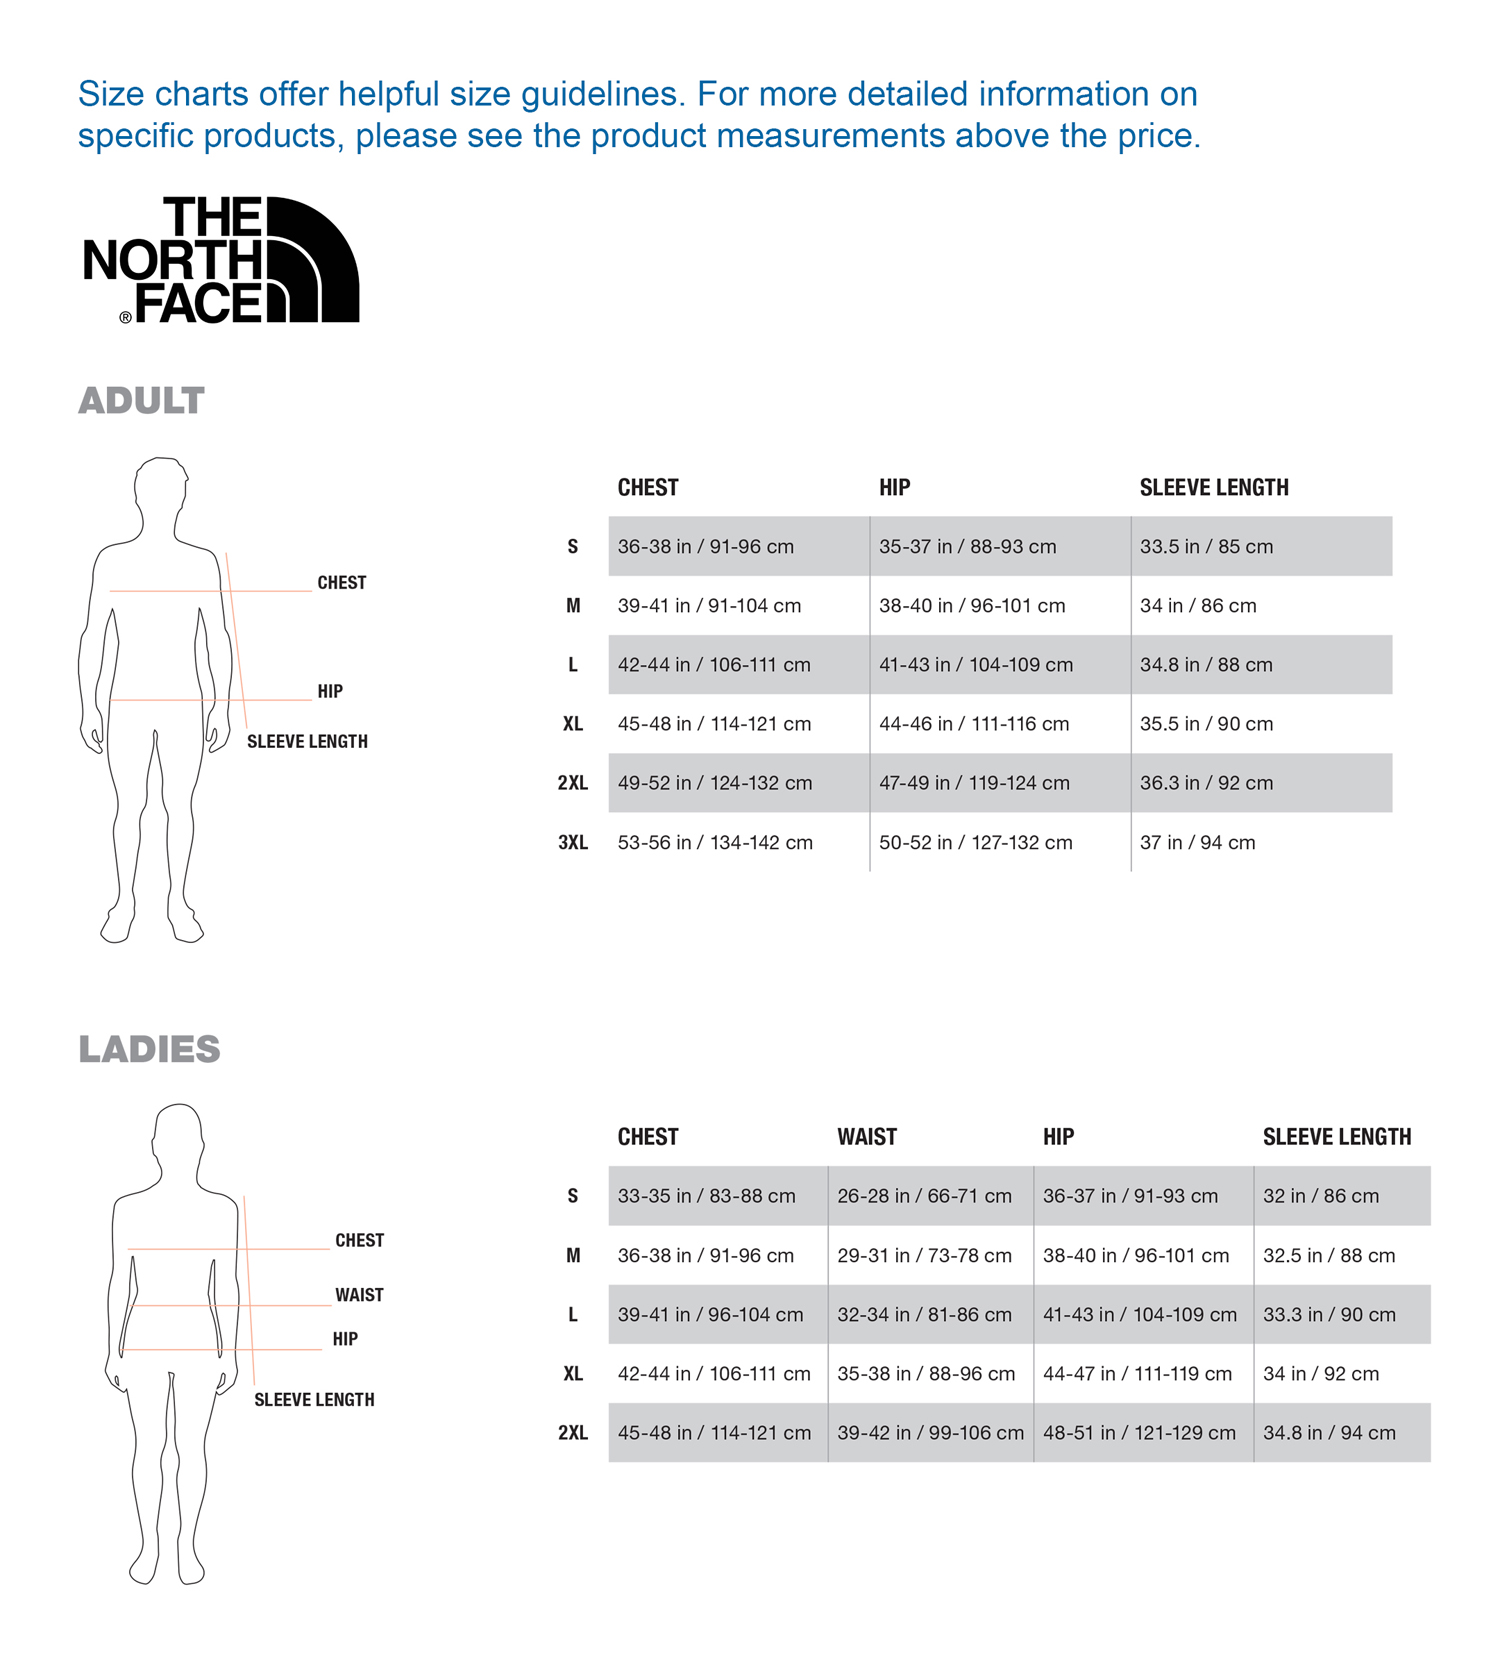 The North Face Size Chart vlr.eng.br